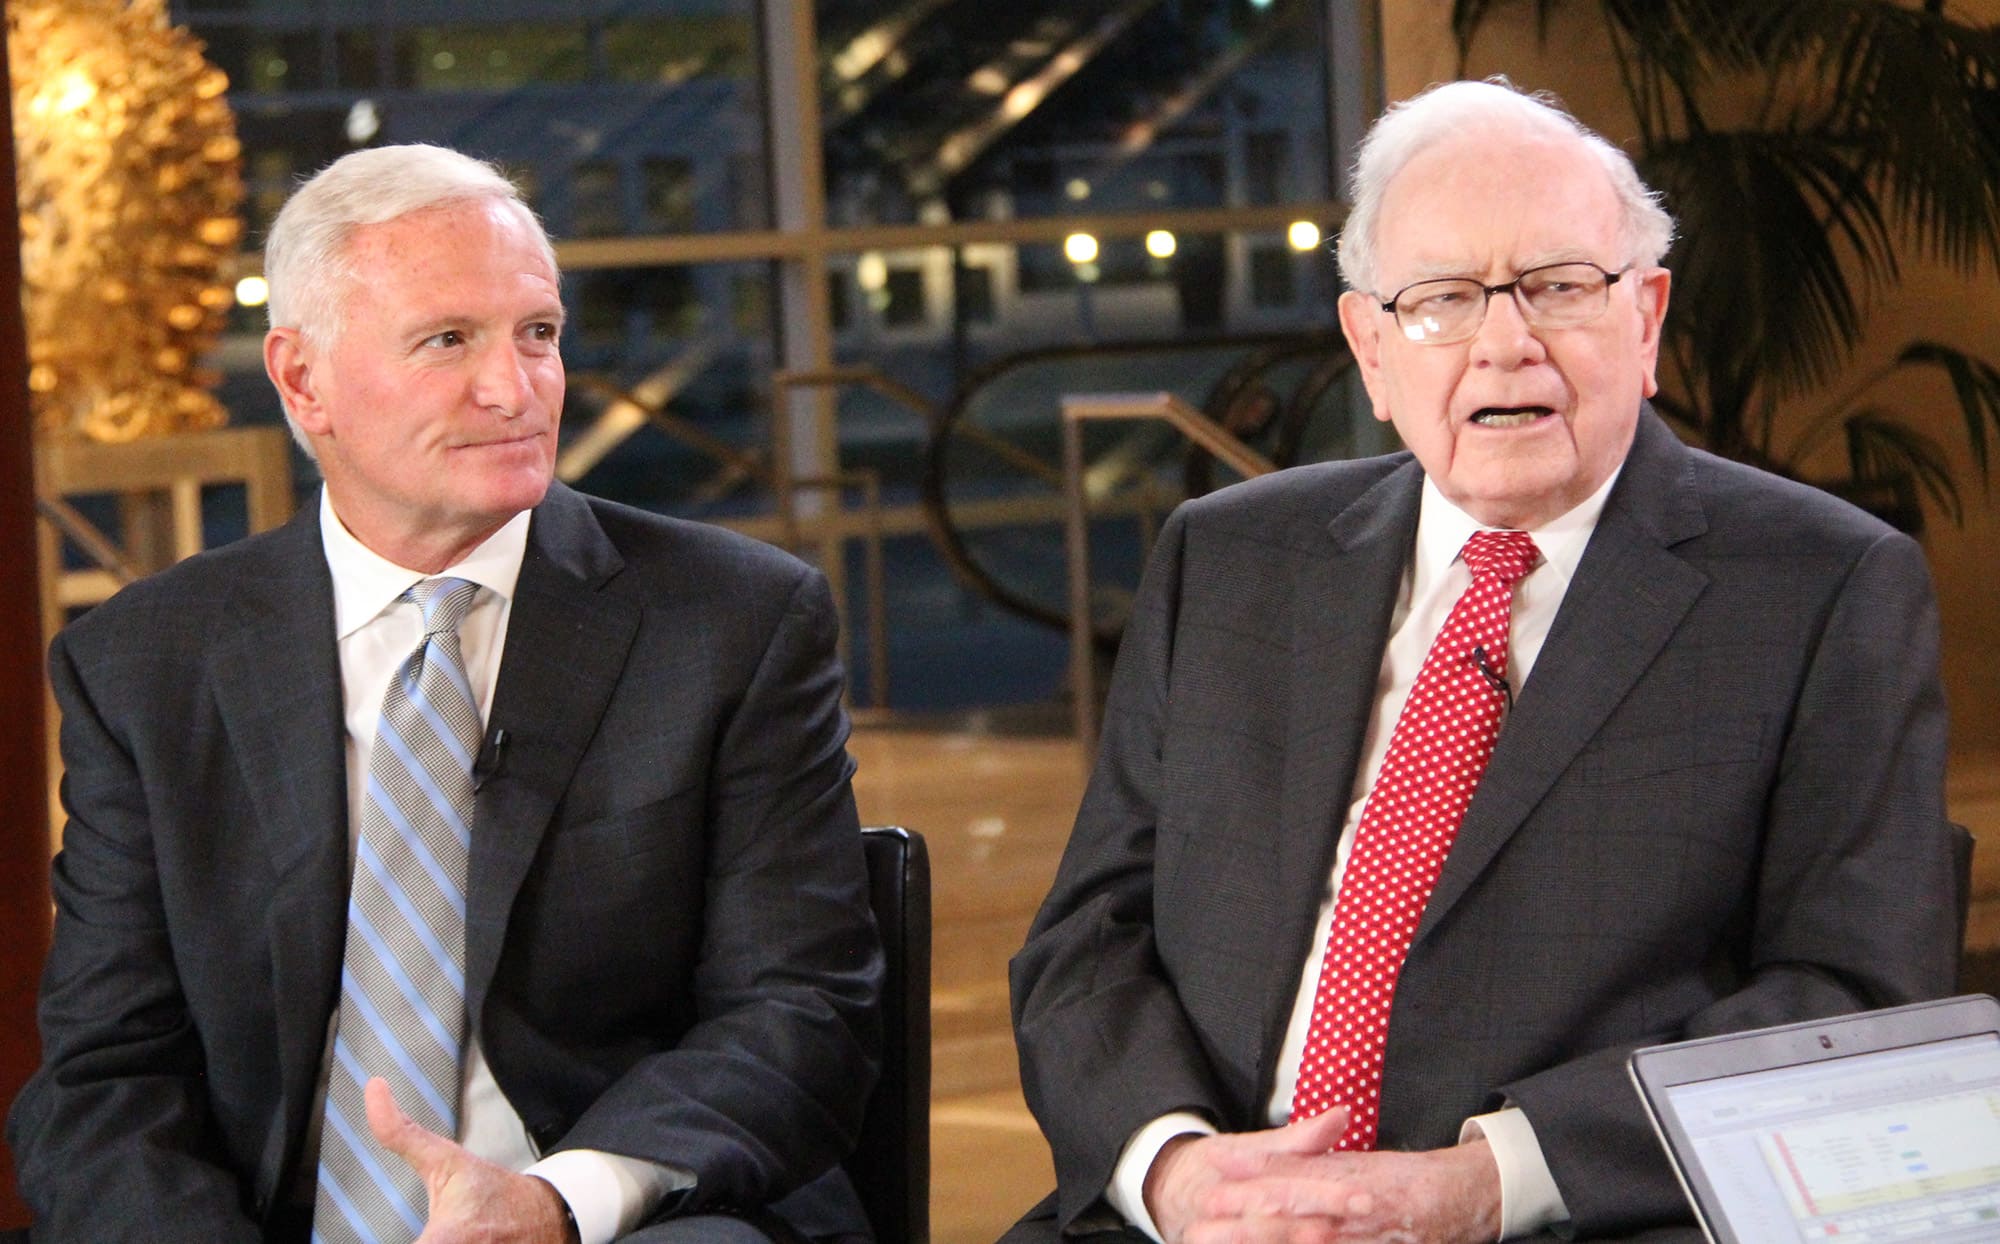 The trial in the Berkshire Hathaway lawsuit has been canceled by Hassan's family